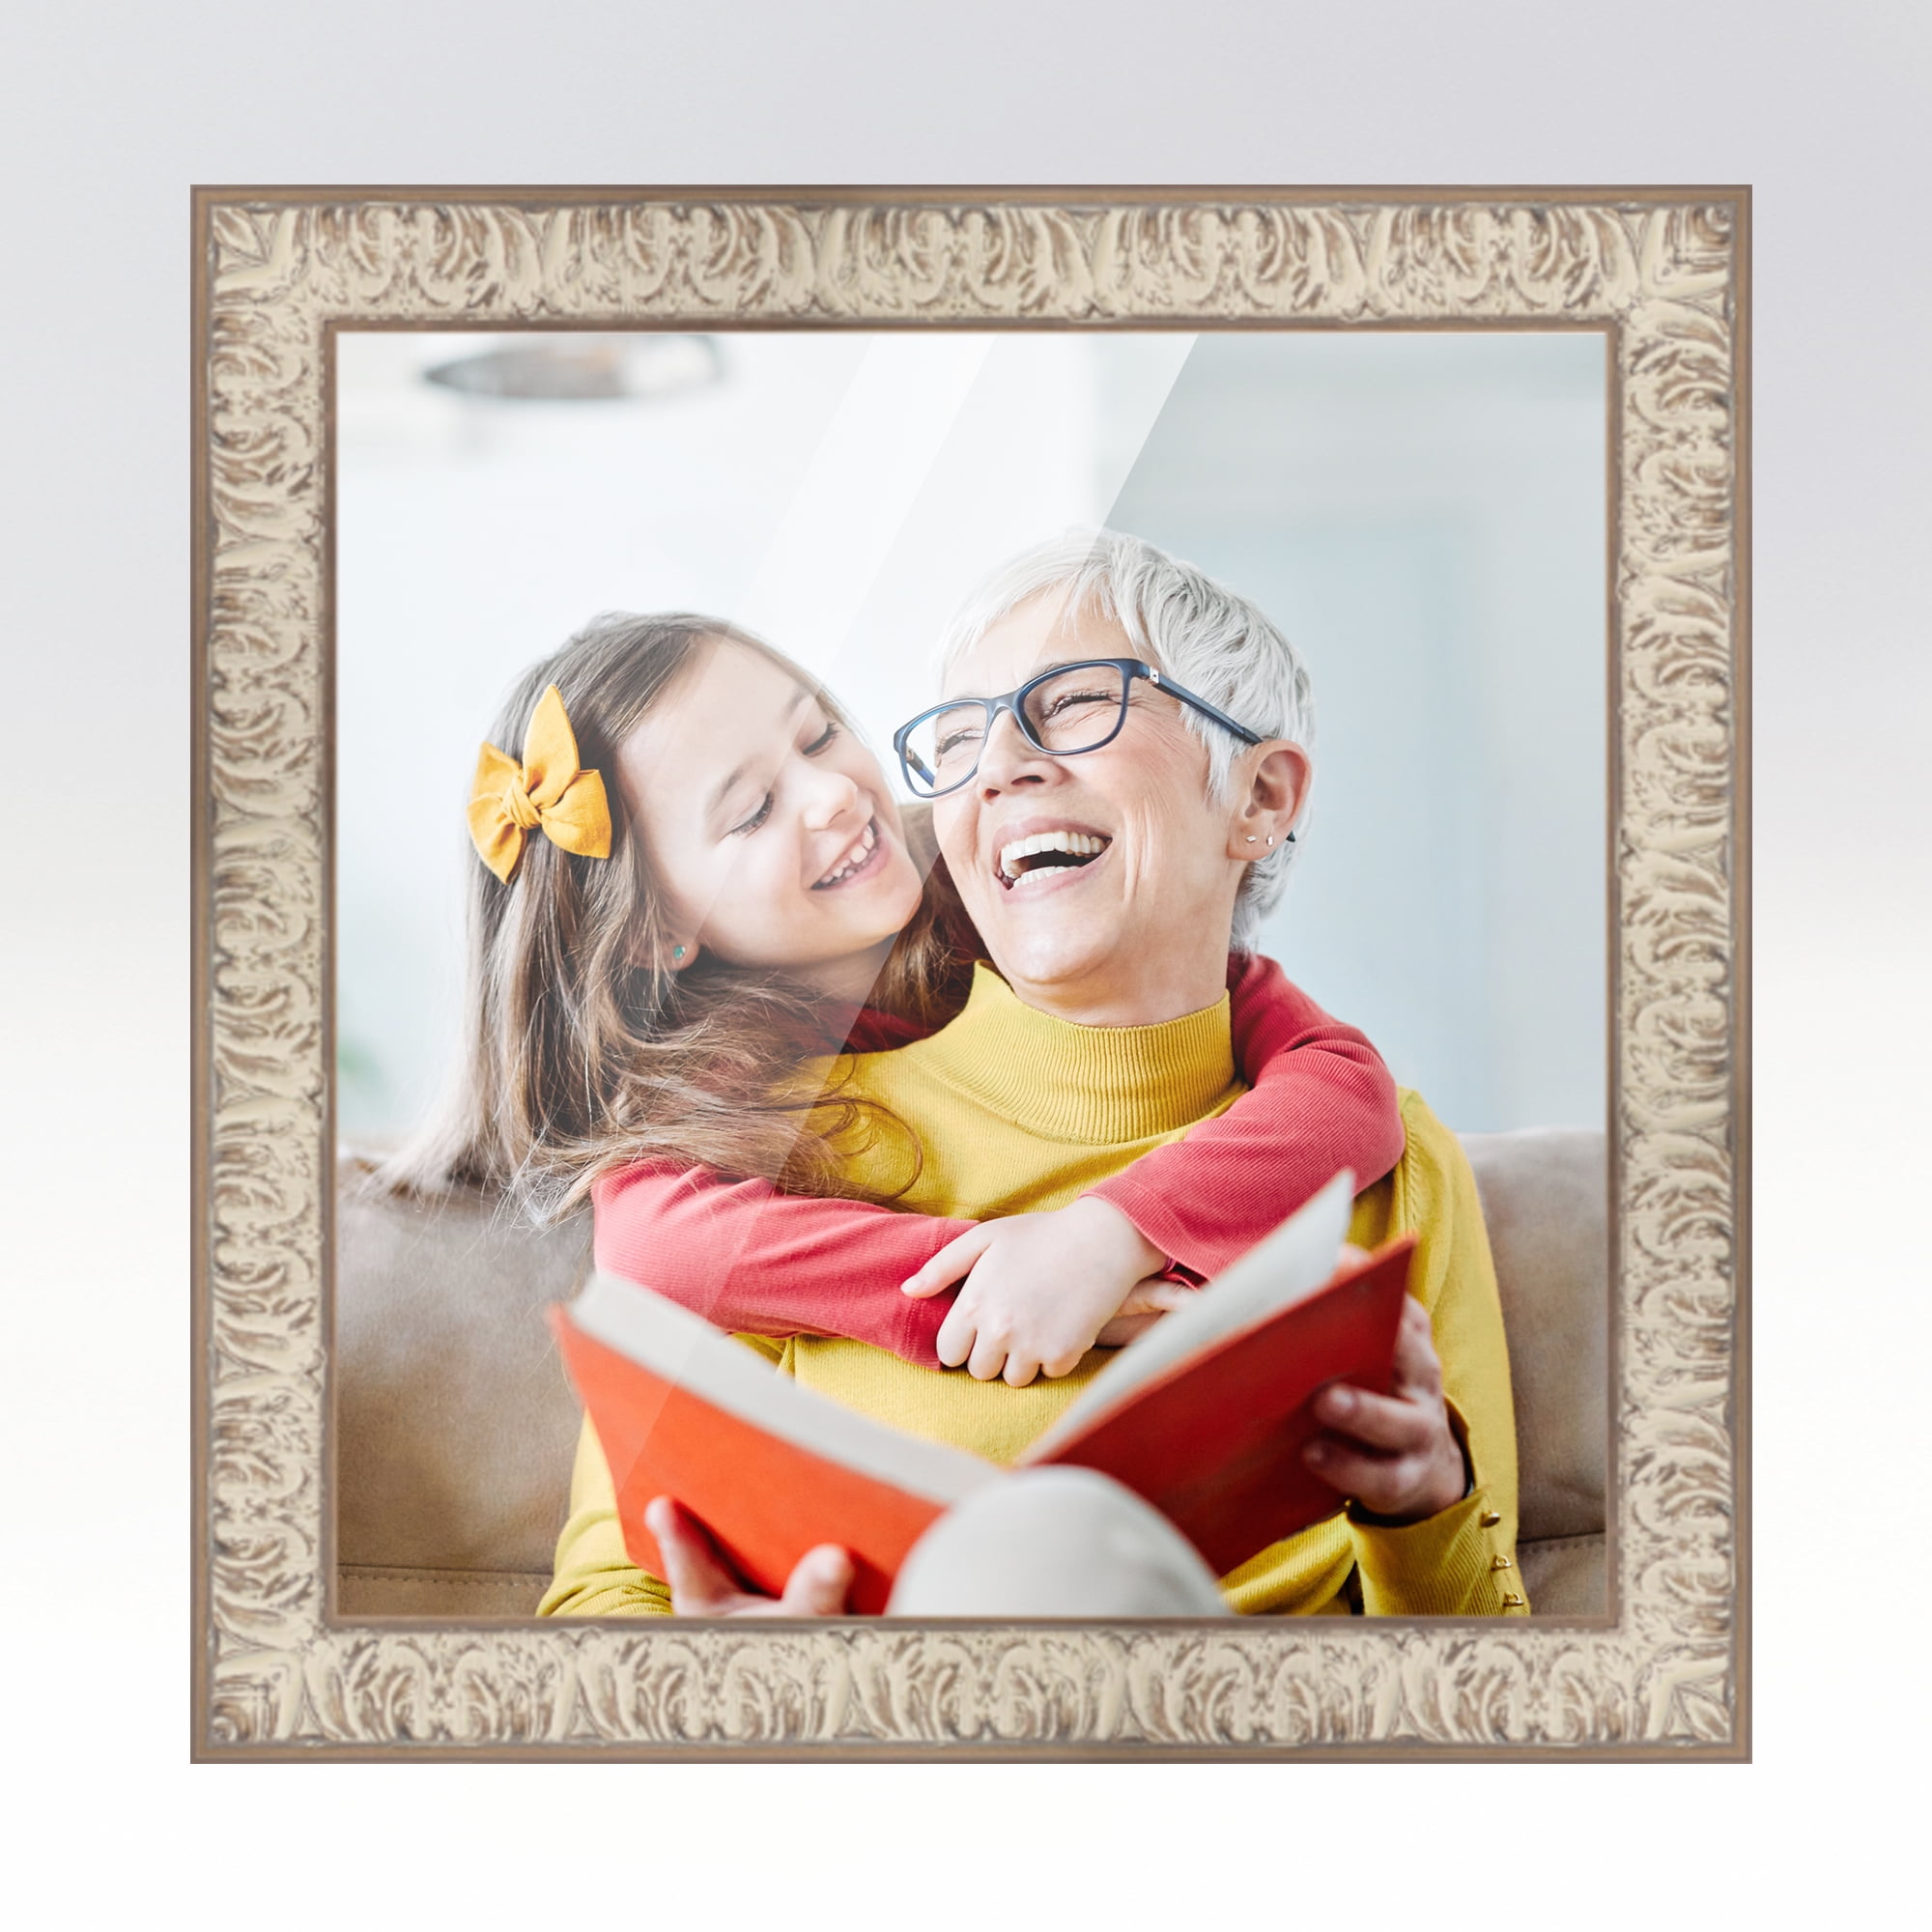 8x8 Frame White Real Wood Picture Frame Width 1.75 inches | Interior Frame  Depth 0.5 inches 